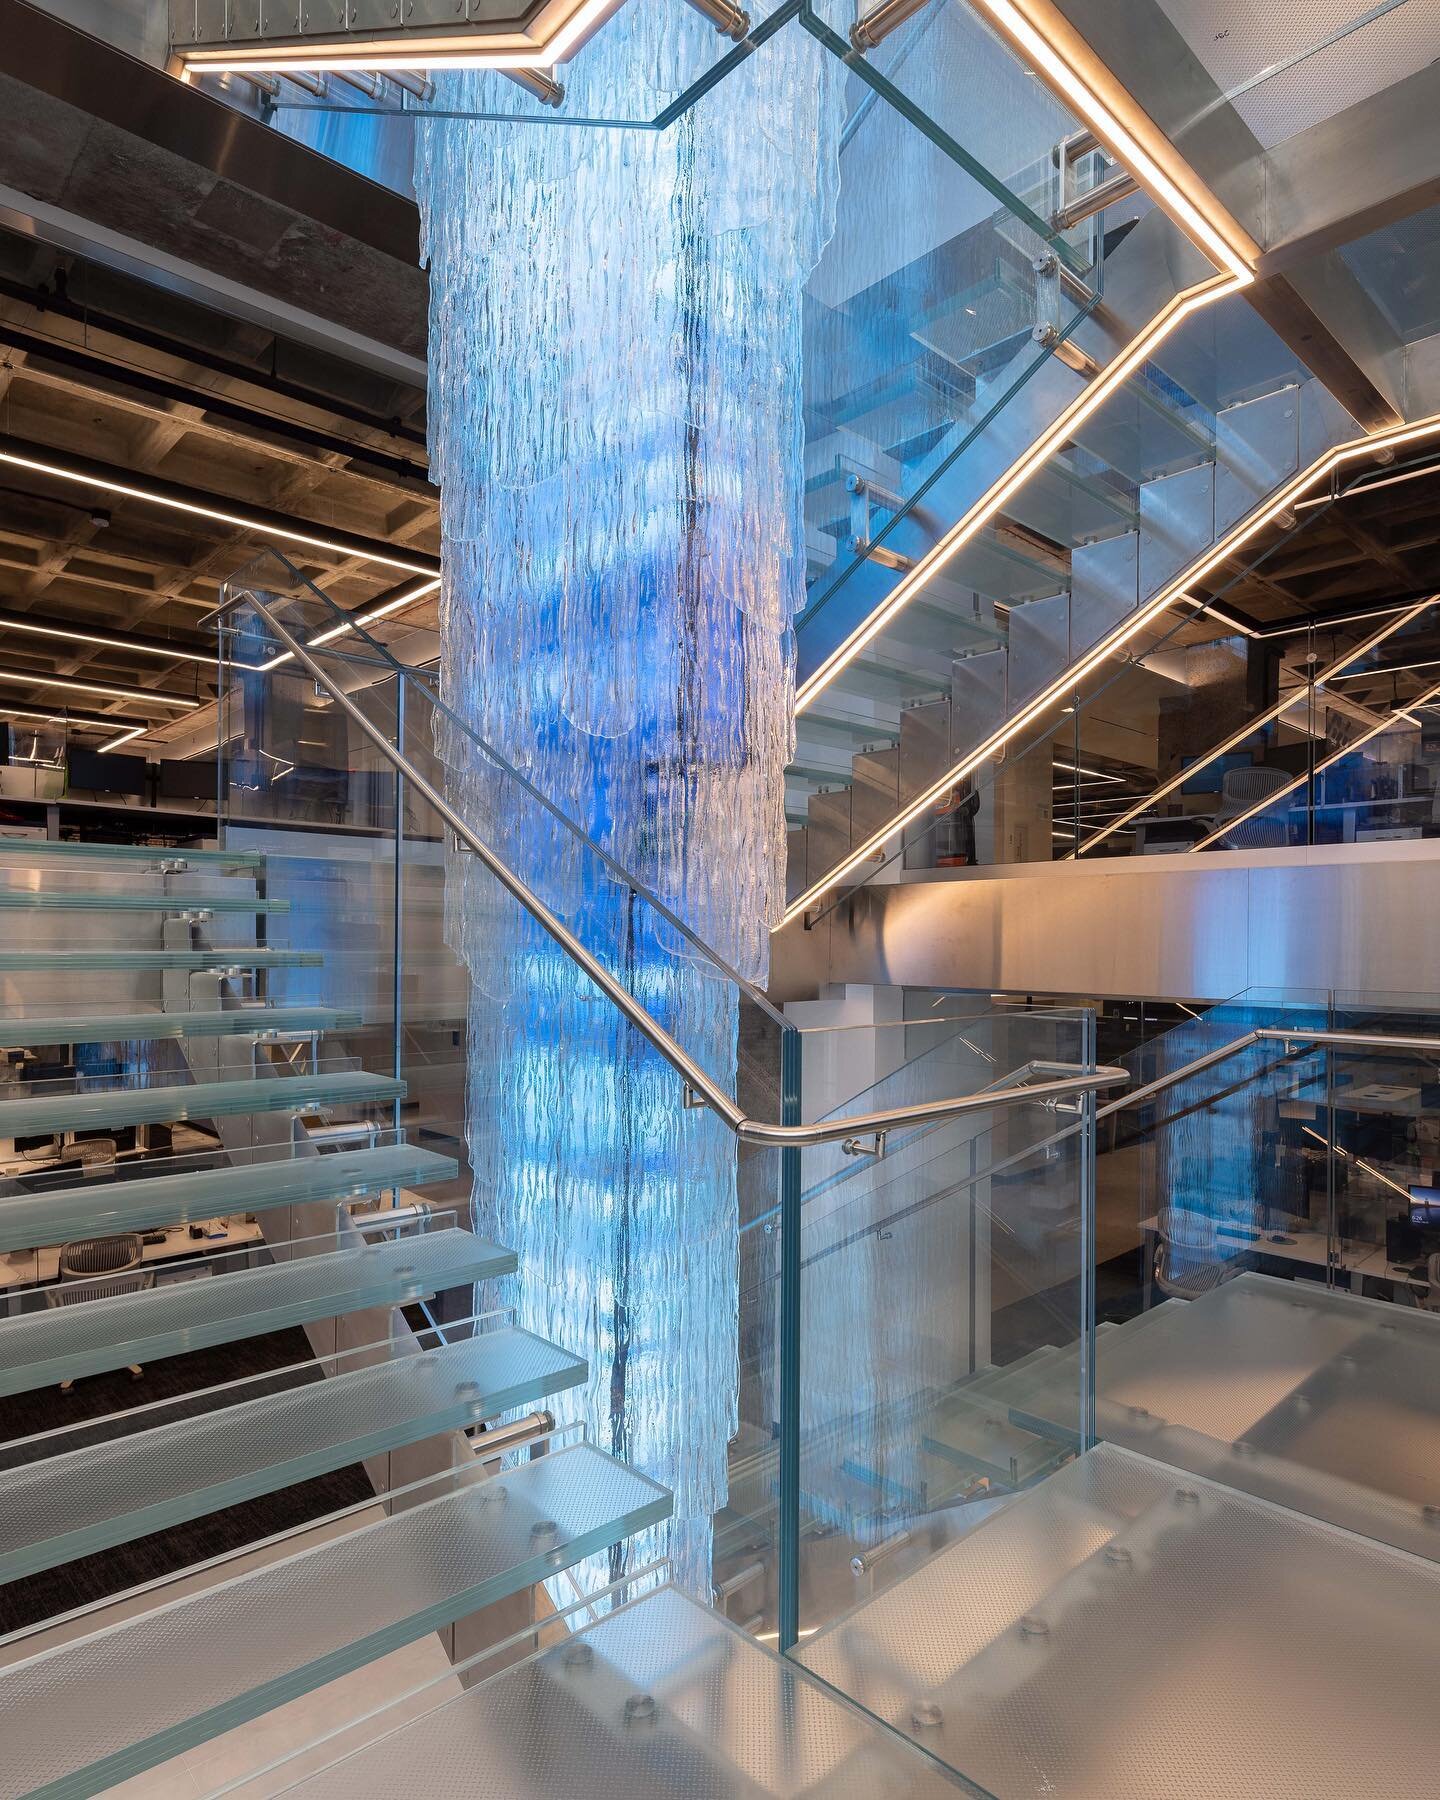 Glass stair collaboration w @marrettiusa , and digital light feature. The staircase lights up 3dtories that can be seen from the corner at 32nd and Broadway. 

#architecture #methodarchitects #stairdesign #glassstair #glassstaircase #interiordesign